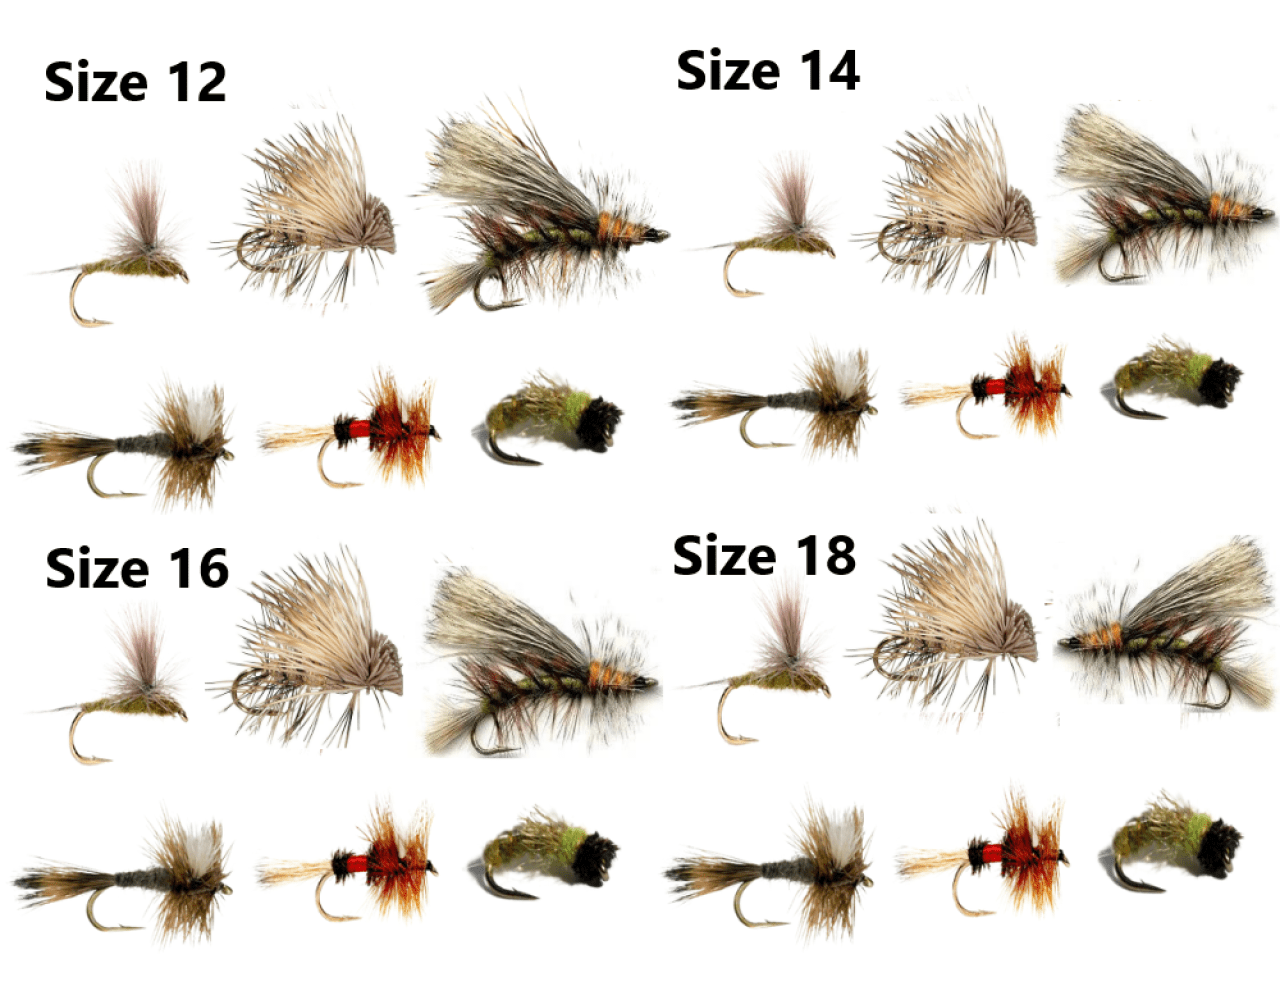 Terrestrials Nymphs 32//64 Premium Hand-Tied Dry Flies Fishing On The Fly Essential Trout Flies Starter Kit Streamers